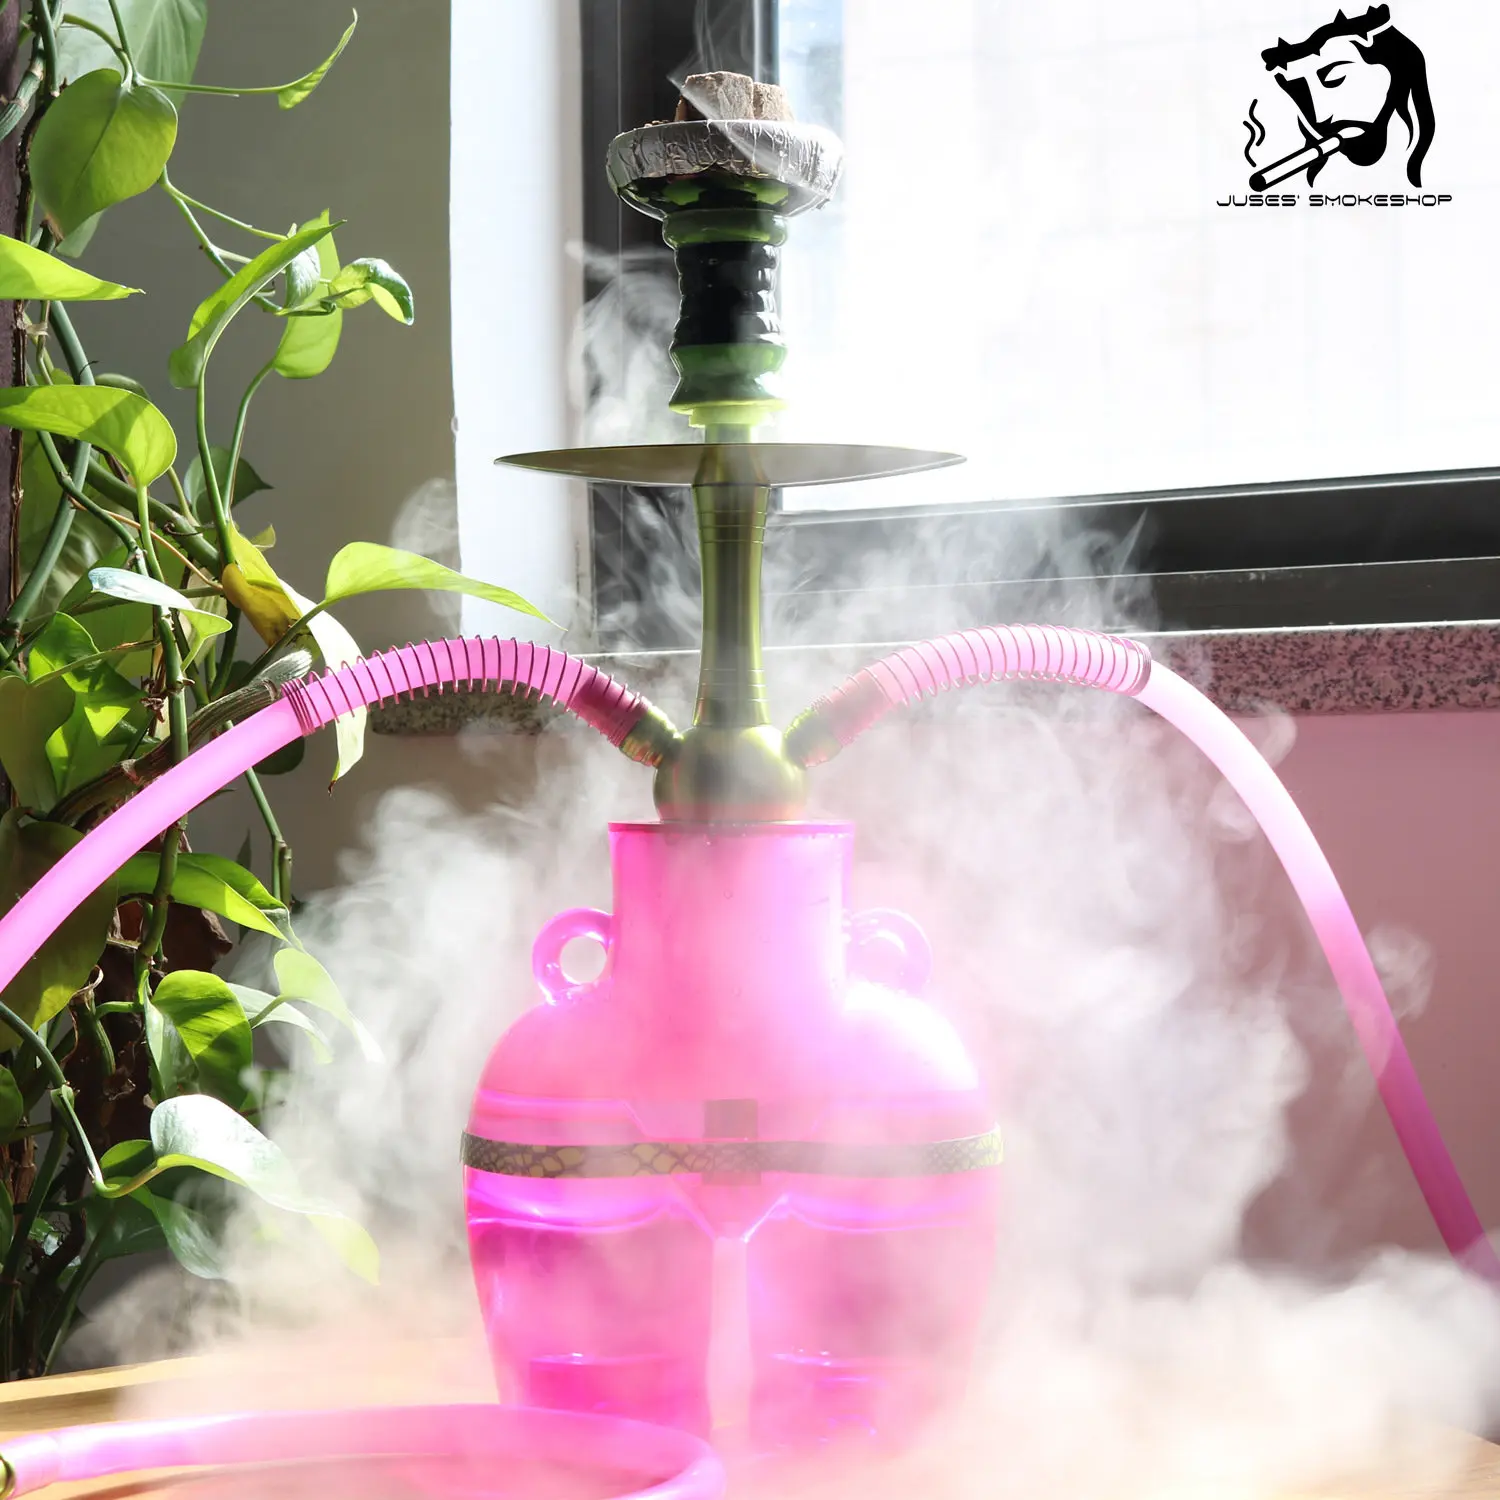 JUSES' SMOKESHOP LED Hookah Shisha Set with Tobacco Bowl Pipes Smoking Grass Complete Chicha for Party Ktv Big Butt Sexy кальян